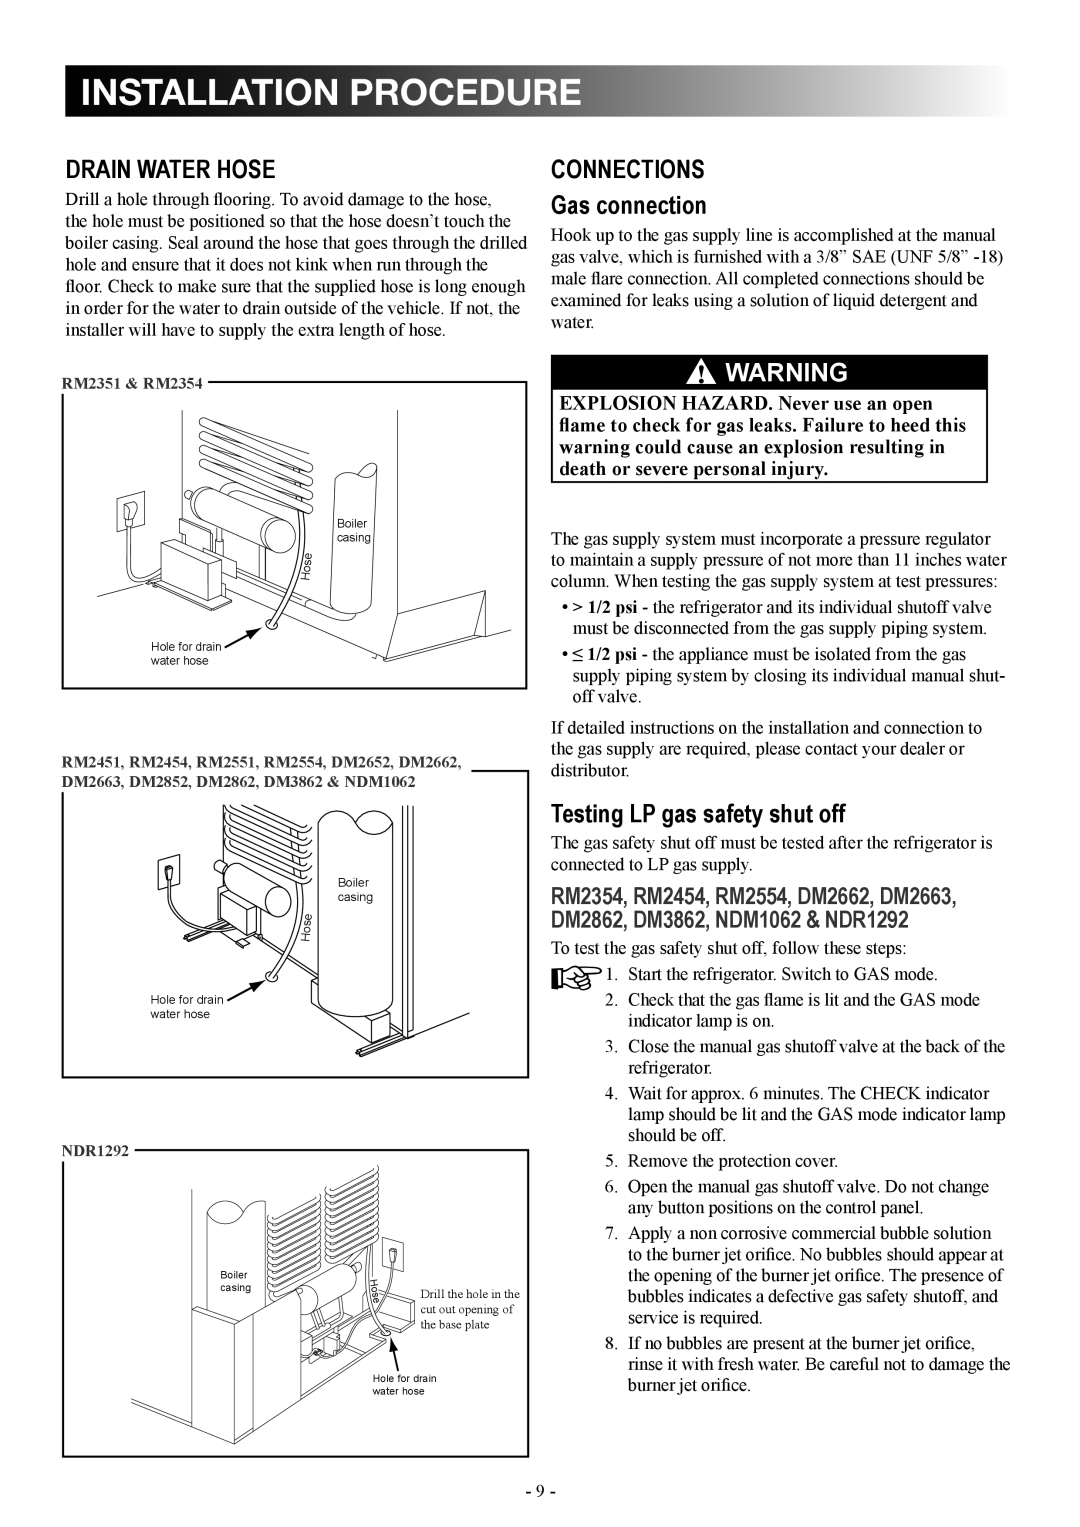 Dometic DM2862 manual installation procedure, Drain water hose, Connections Gas connection, 6! warning 